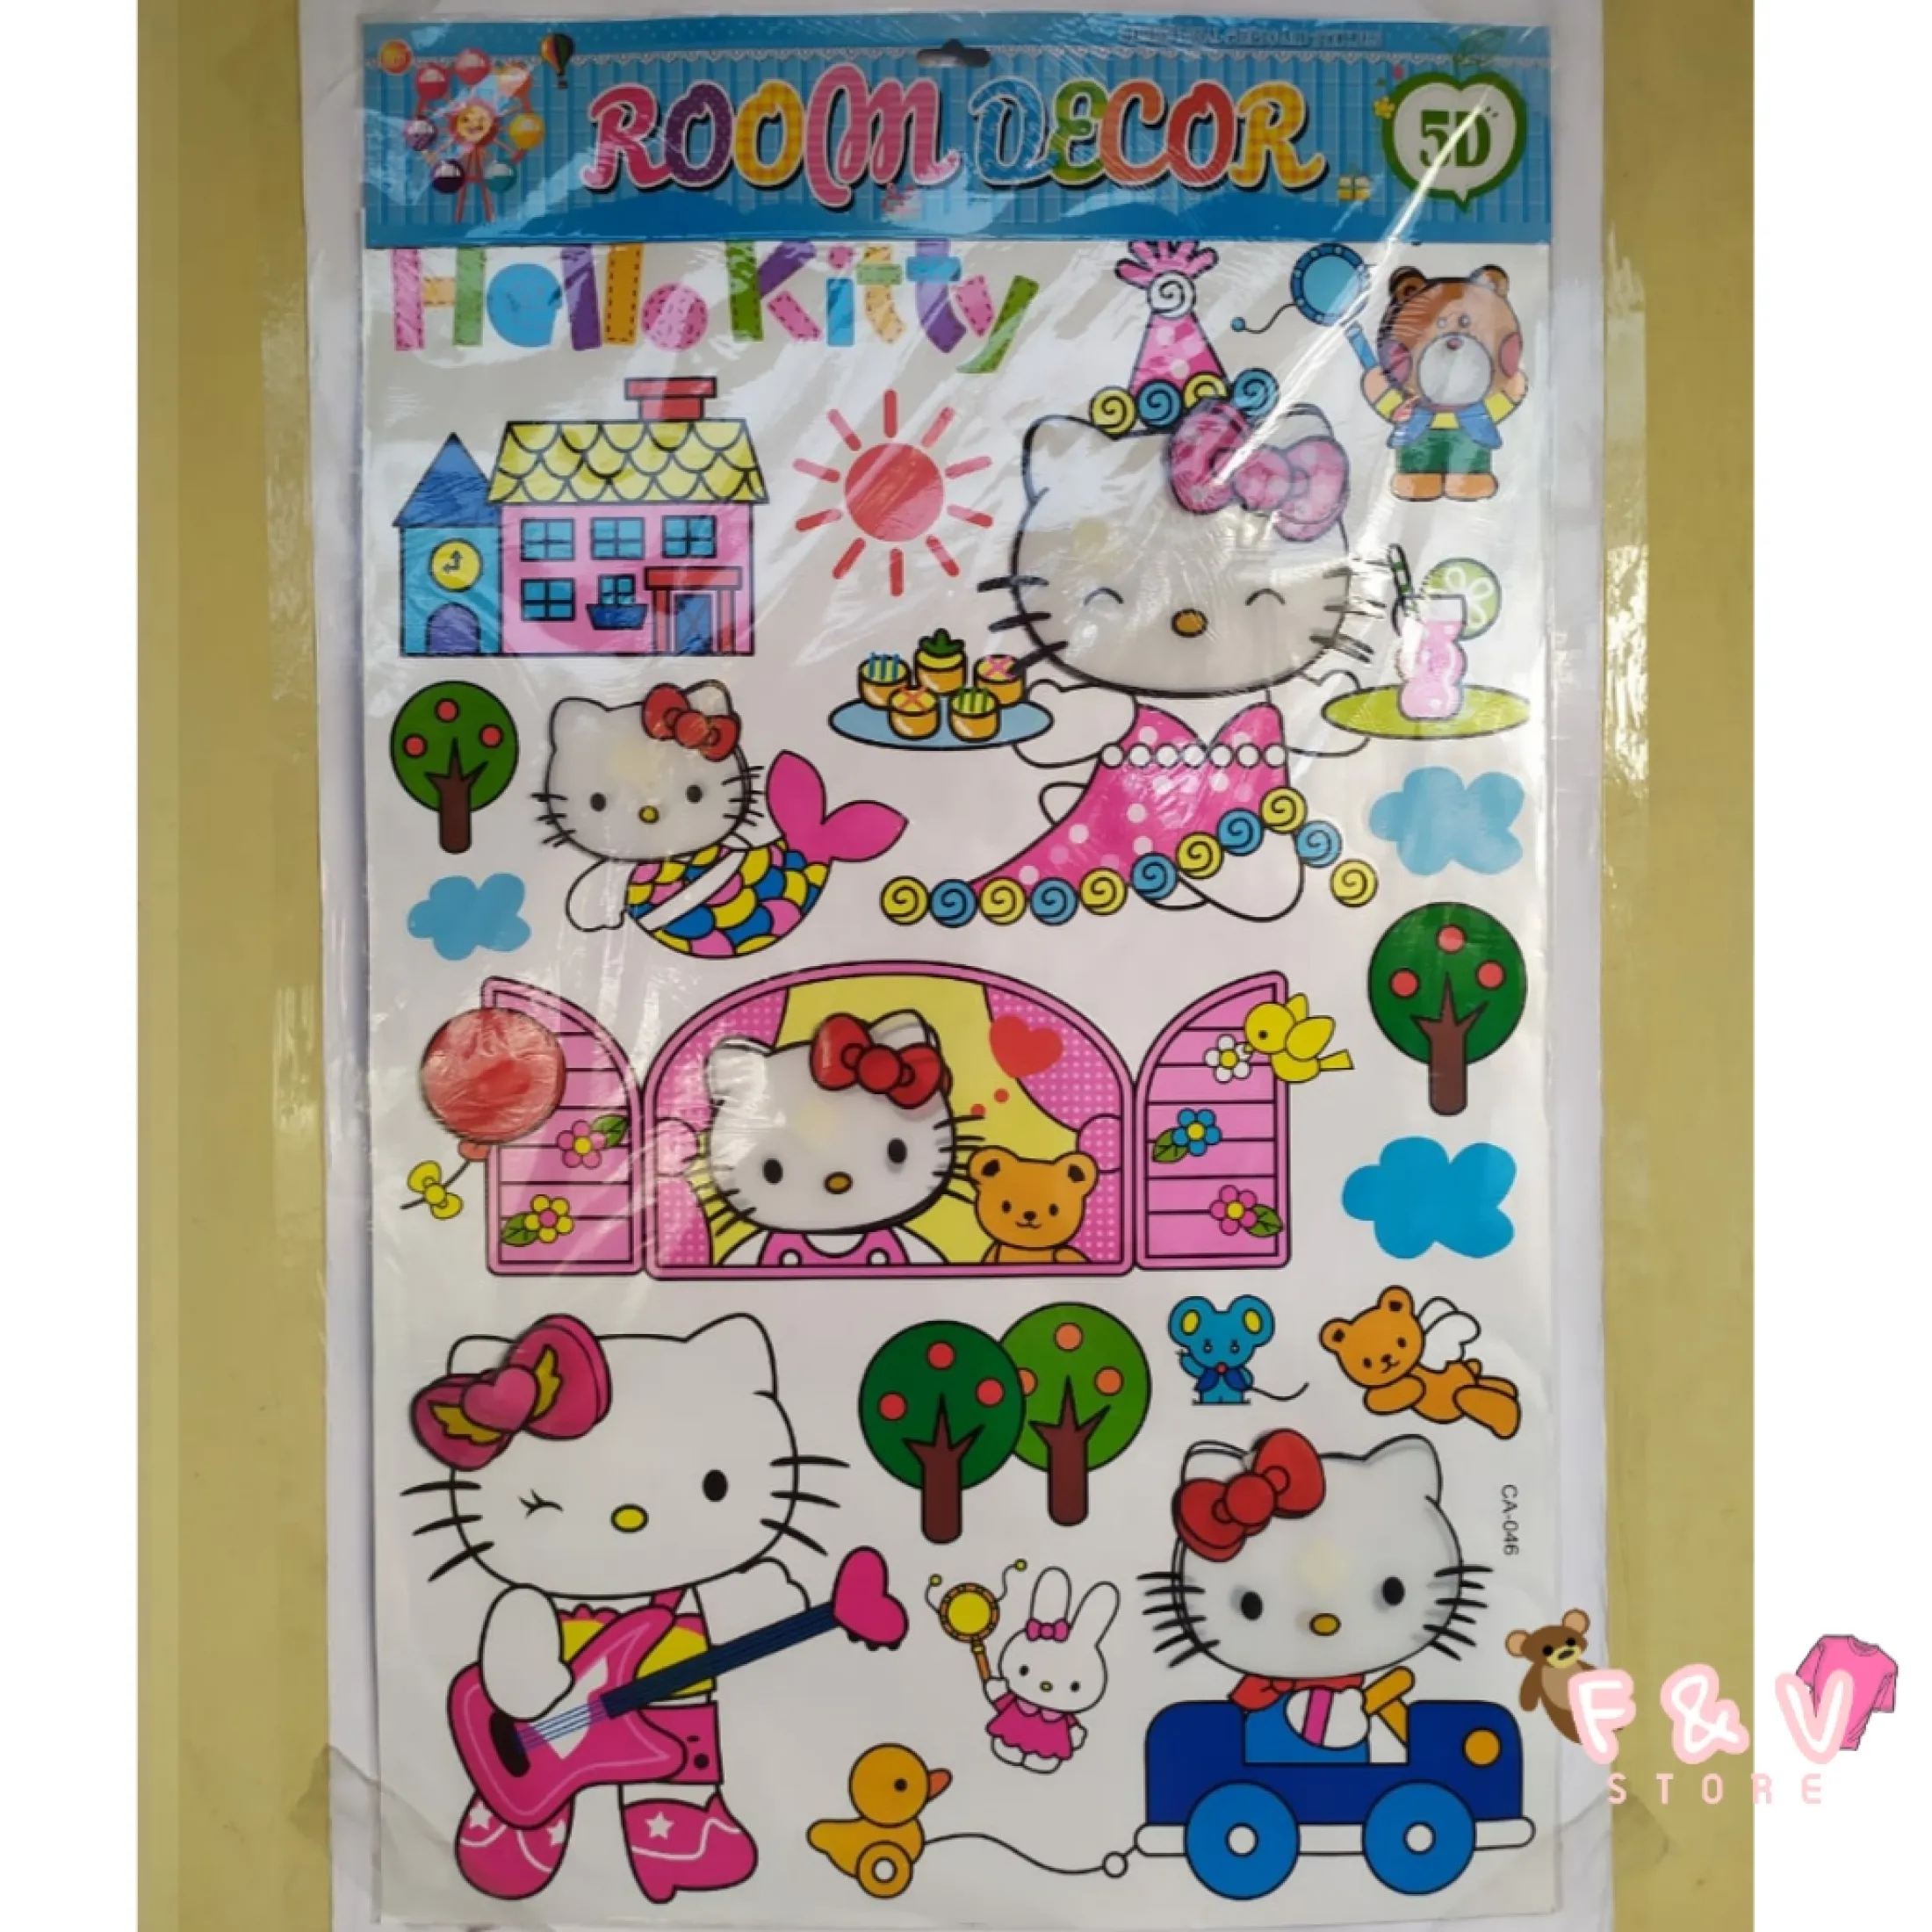 Wallpaper Dinding Hello Kitty 3d Image Num 81